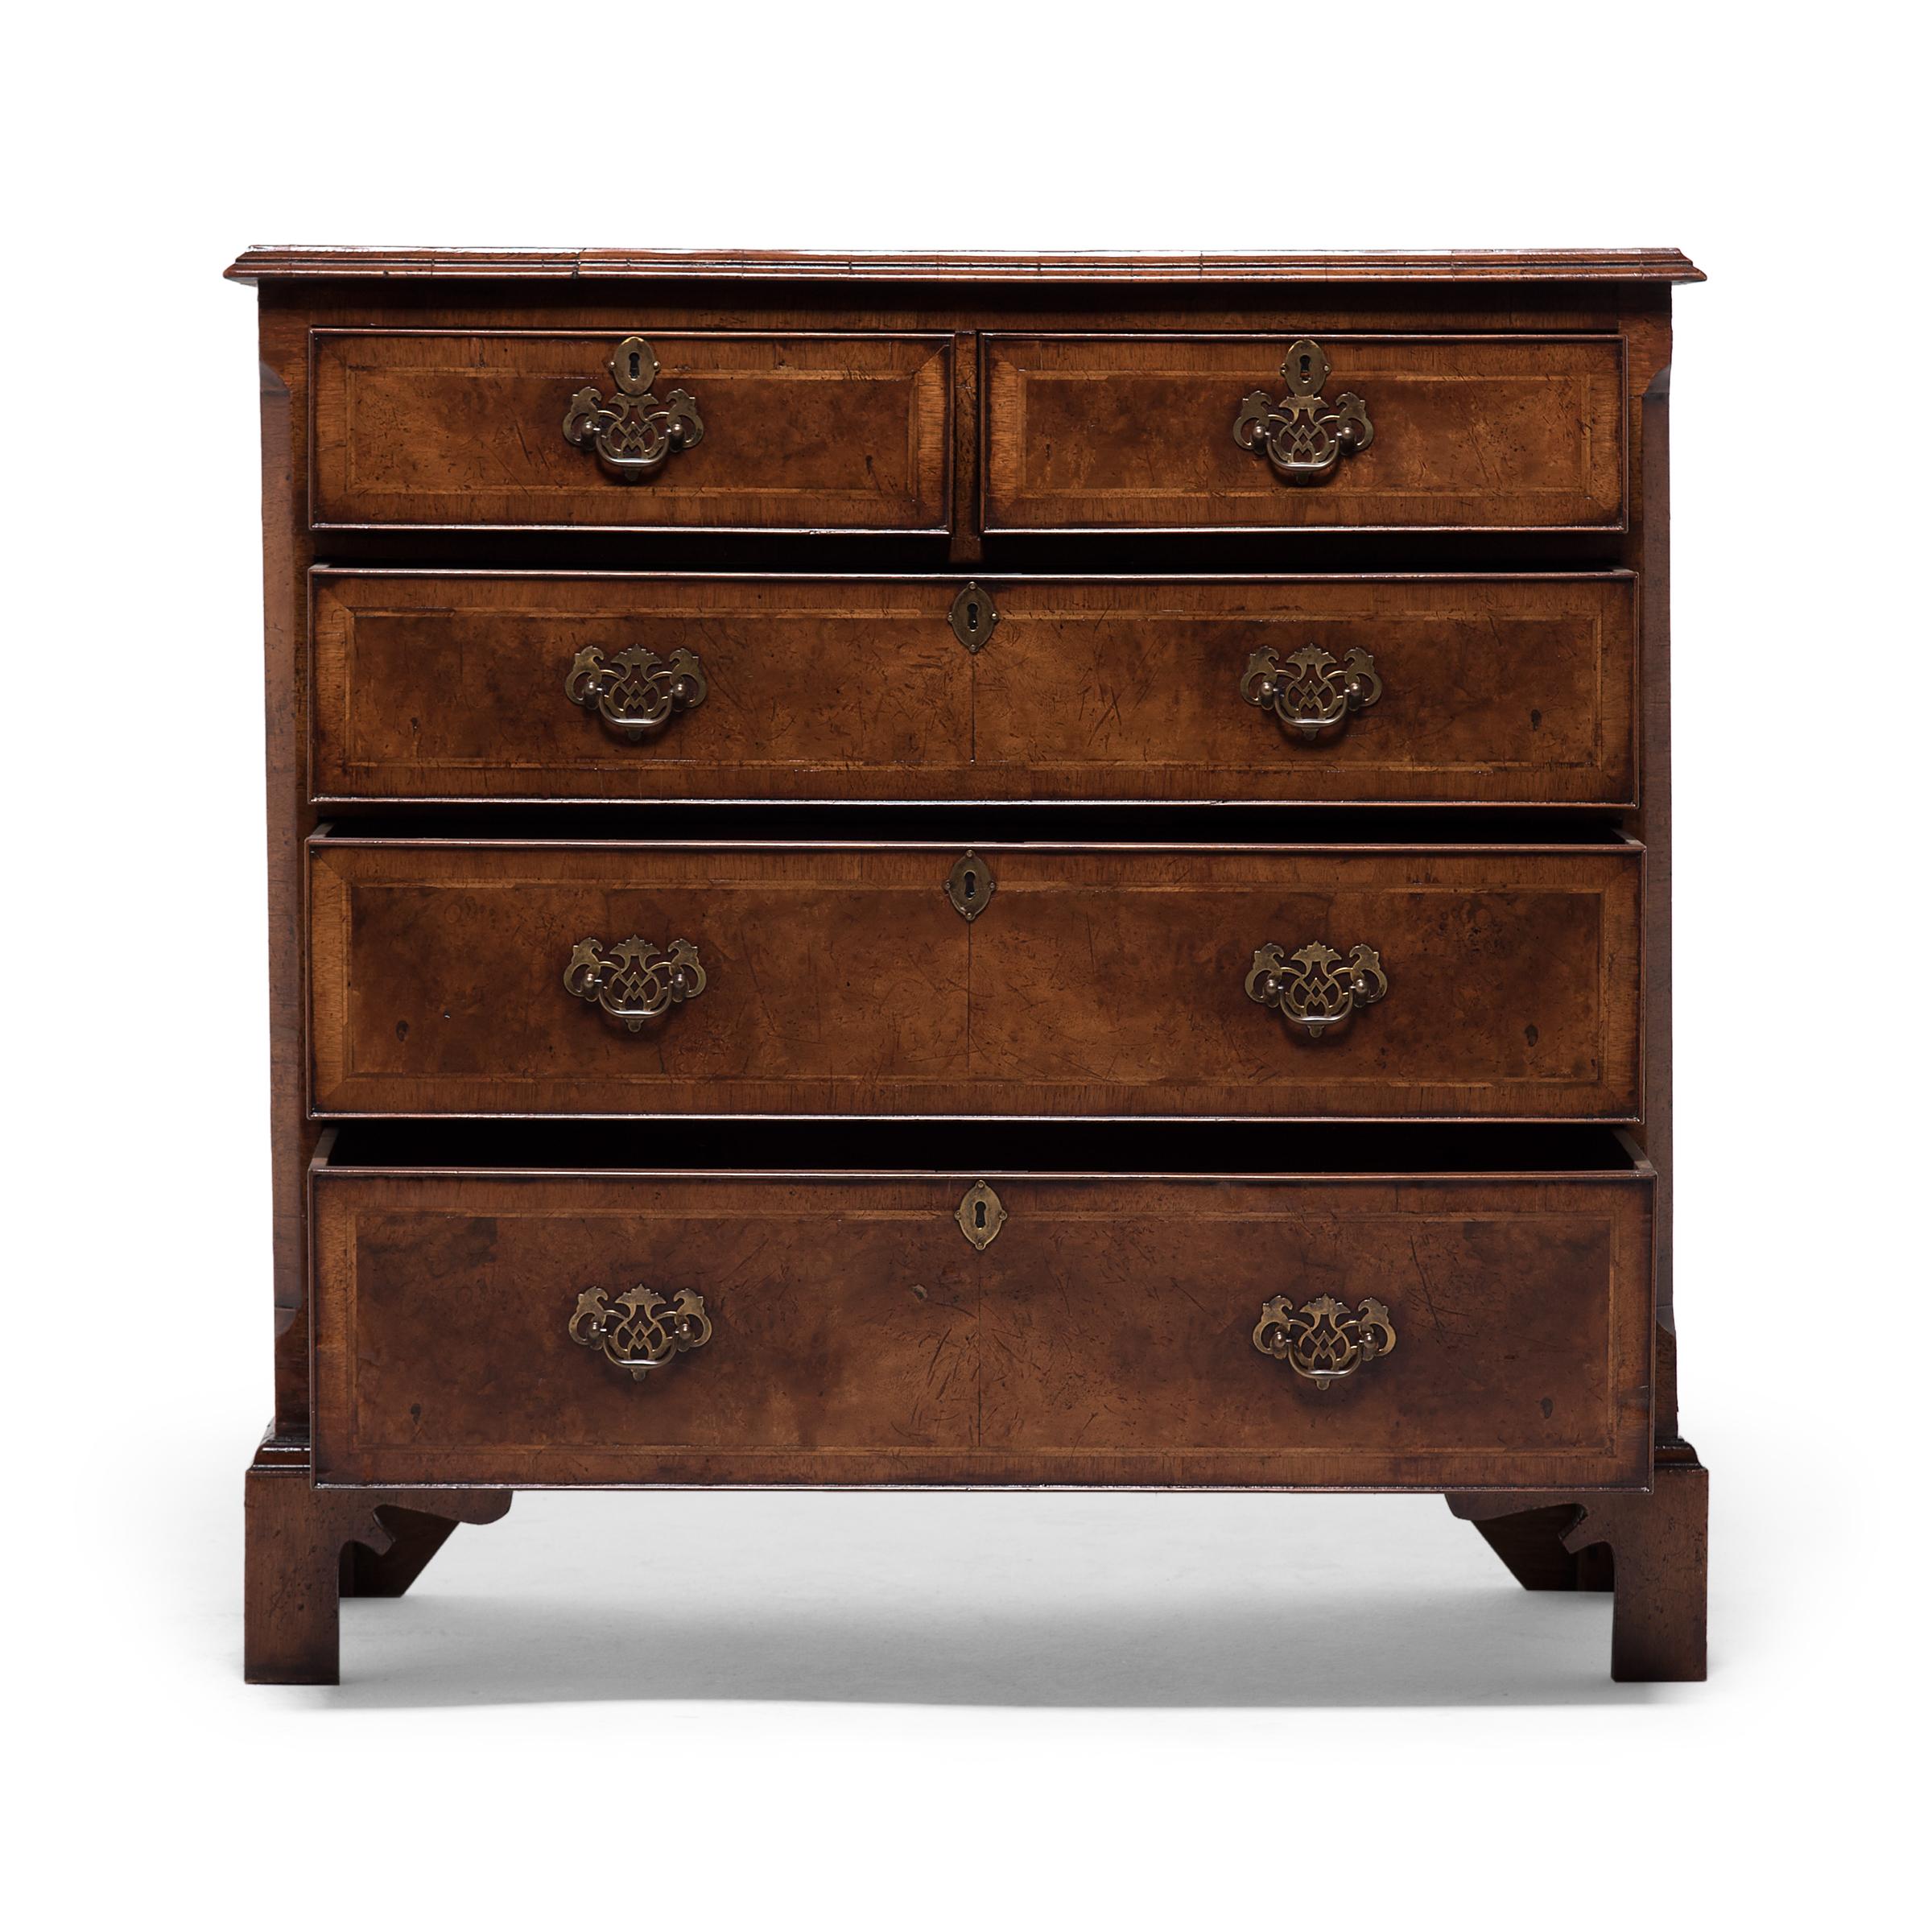 Gilt Queen Anne Style Burled Walnut Chest of Drawers, c. 1800 For Sale